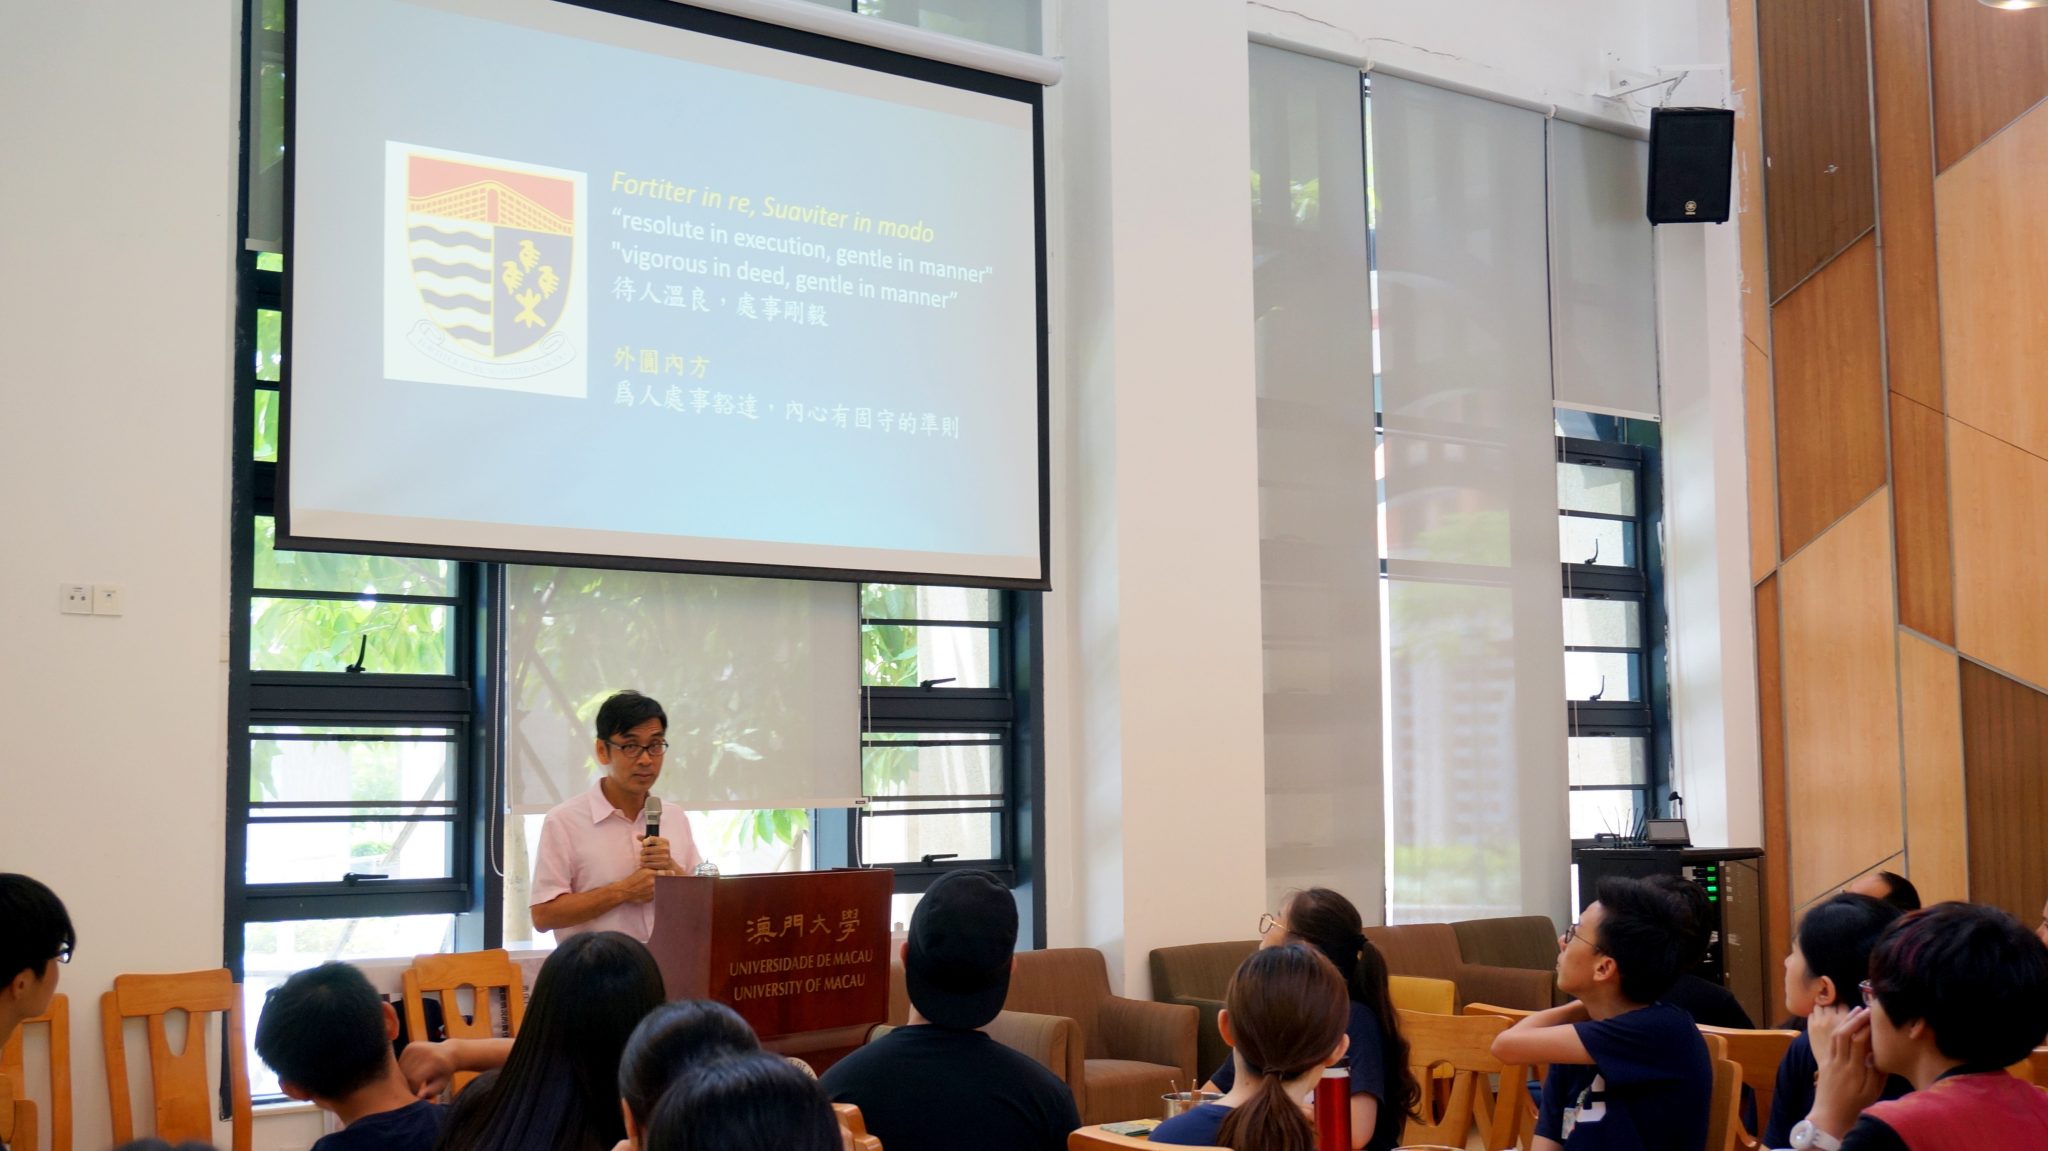 College Master Prof. Iu Vai Pan kicked off the Student Leadership Program by speaking about the new College Crest and Motto at the opening session. 院長姚偉彬教授主持為期四天的學生領袖計劃訓練營的開幕式。